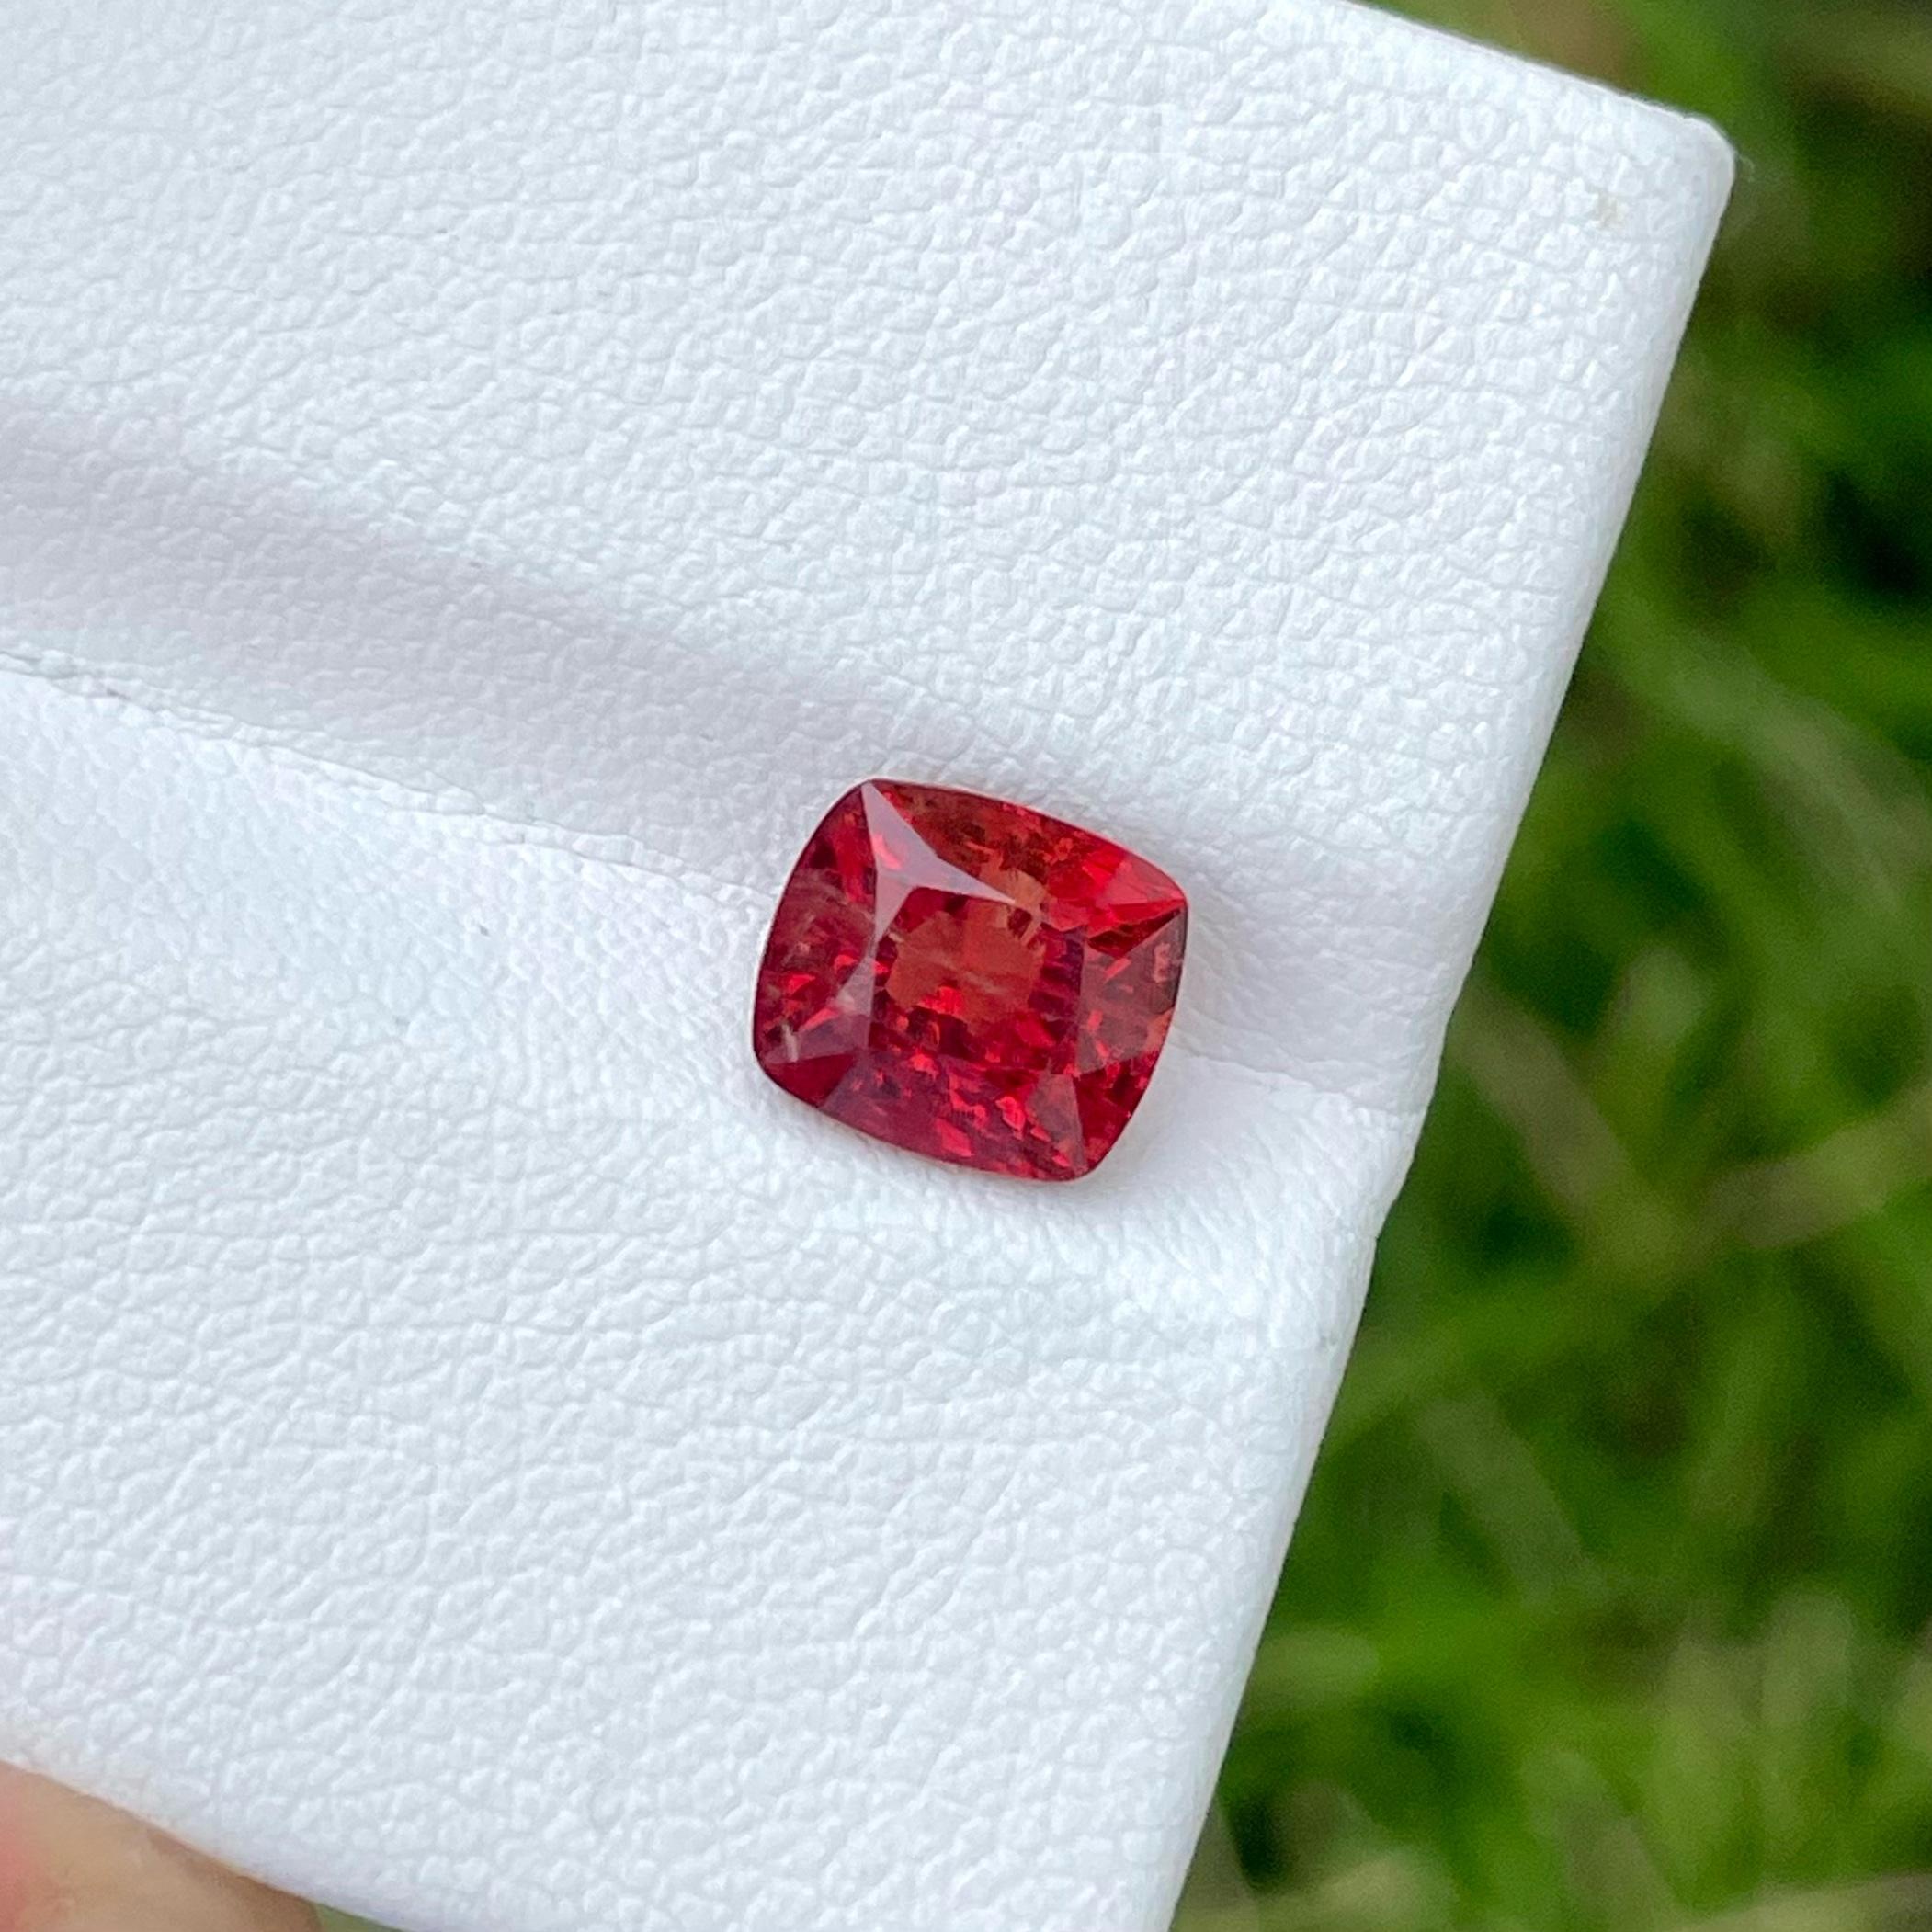 Weight 2.45 carats
Dimensions 8.1 x 7.2 x 5.4 mm
Treatment None 
Origin Burma 
Clarity SI (Slightly Included)
Shape Cushion 
Cut Fancy Cushion


Discover the captivating allure of a 2.45-carat Cushion Cut Red Burmese Spinel, a truly exquisite and